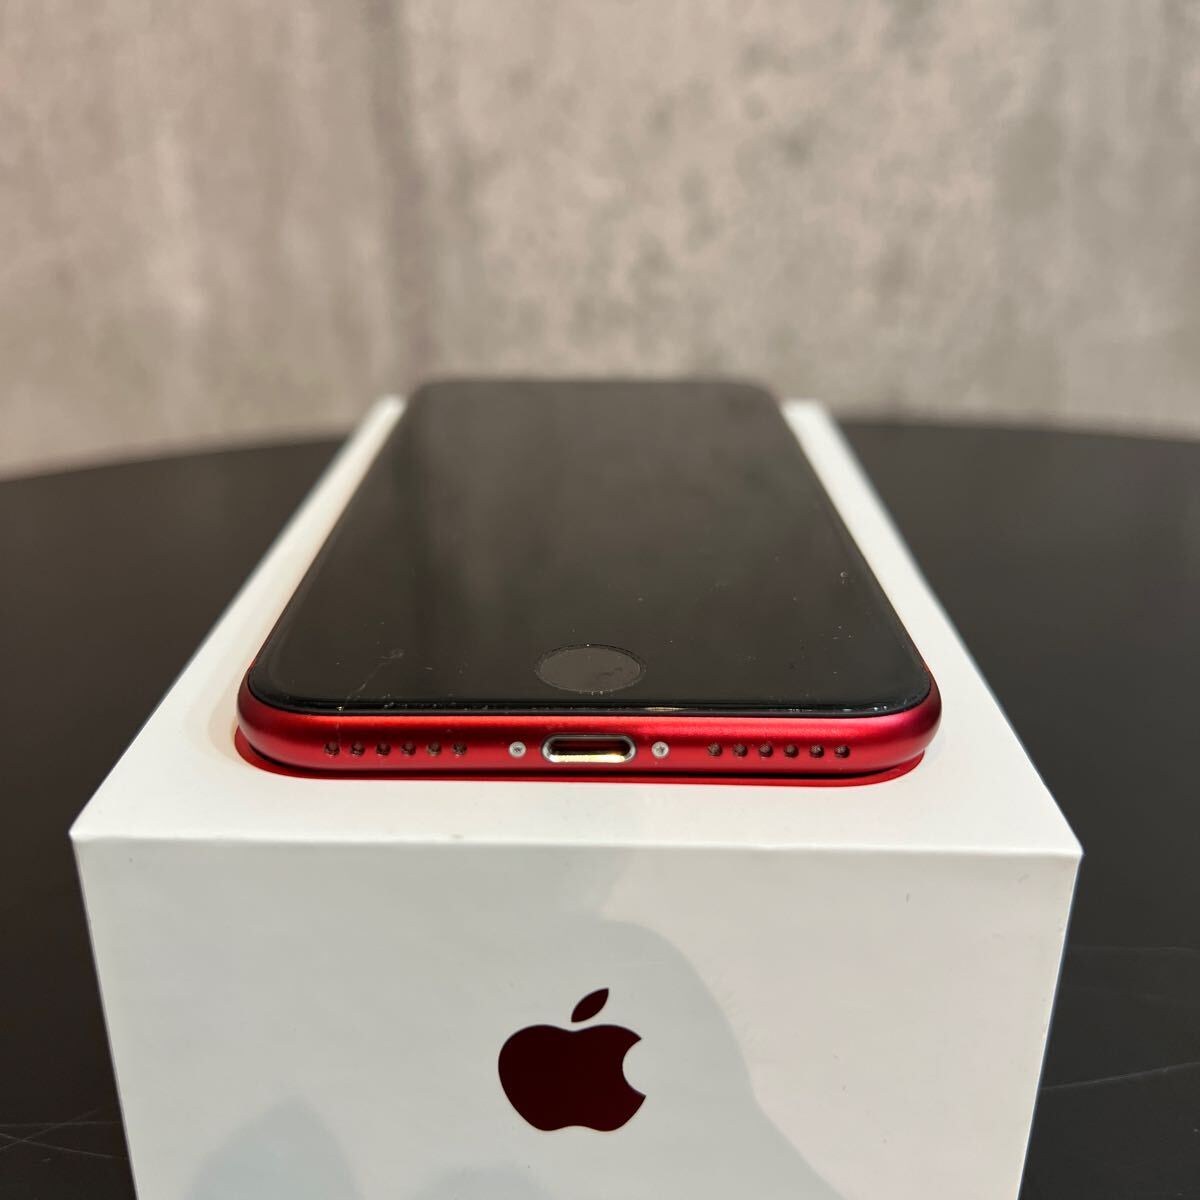 Apple iPhone SE (第2世代) (PRODUCT)RED Special Edition 64GB NX9U2J/A IOS17.4.1 初期化済 バッテリー 87%の画像6